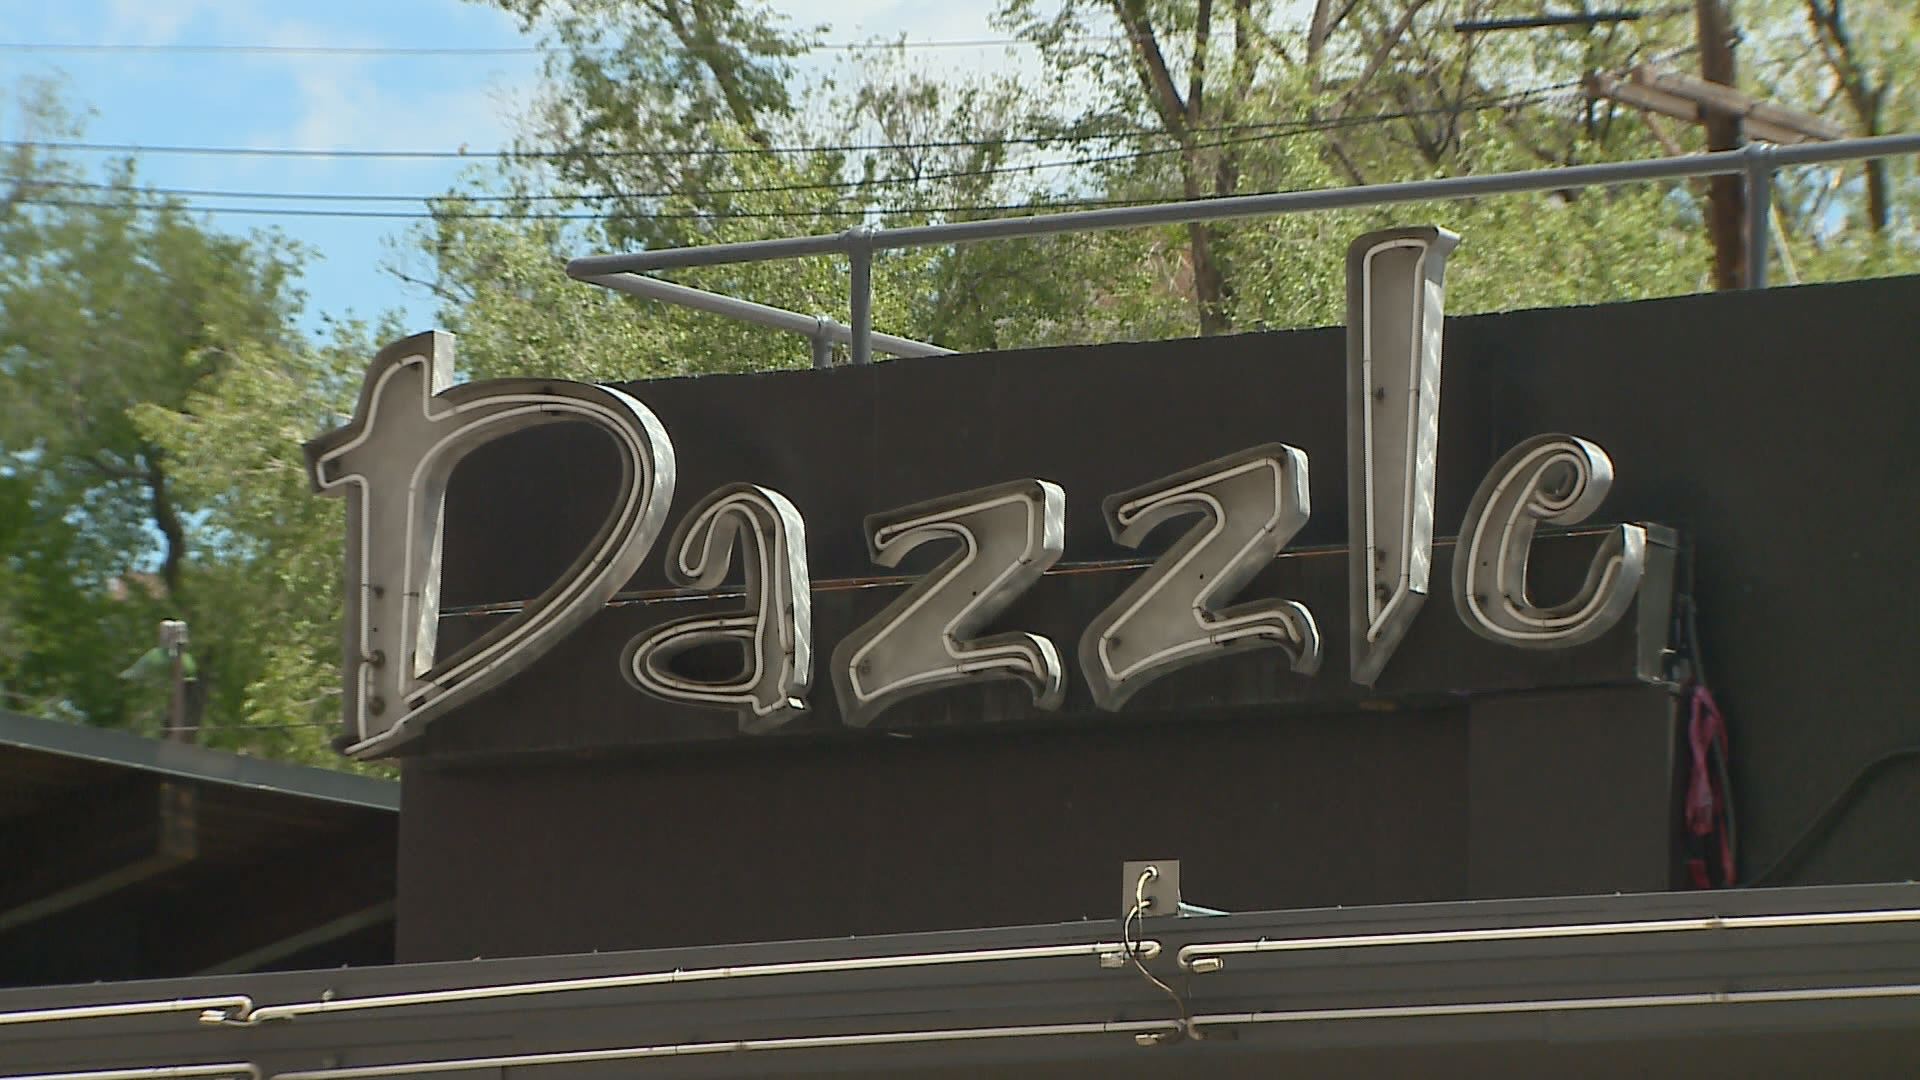 Denver's Dazzle Jazz moves out 19 years of history in one day